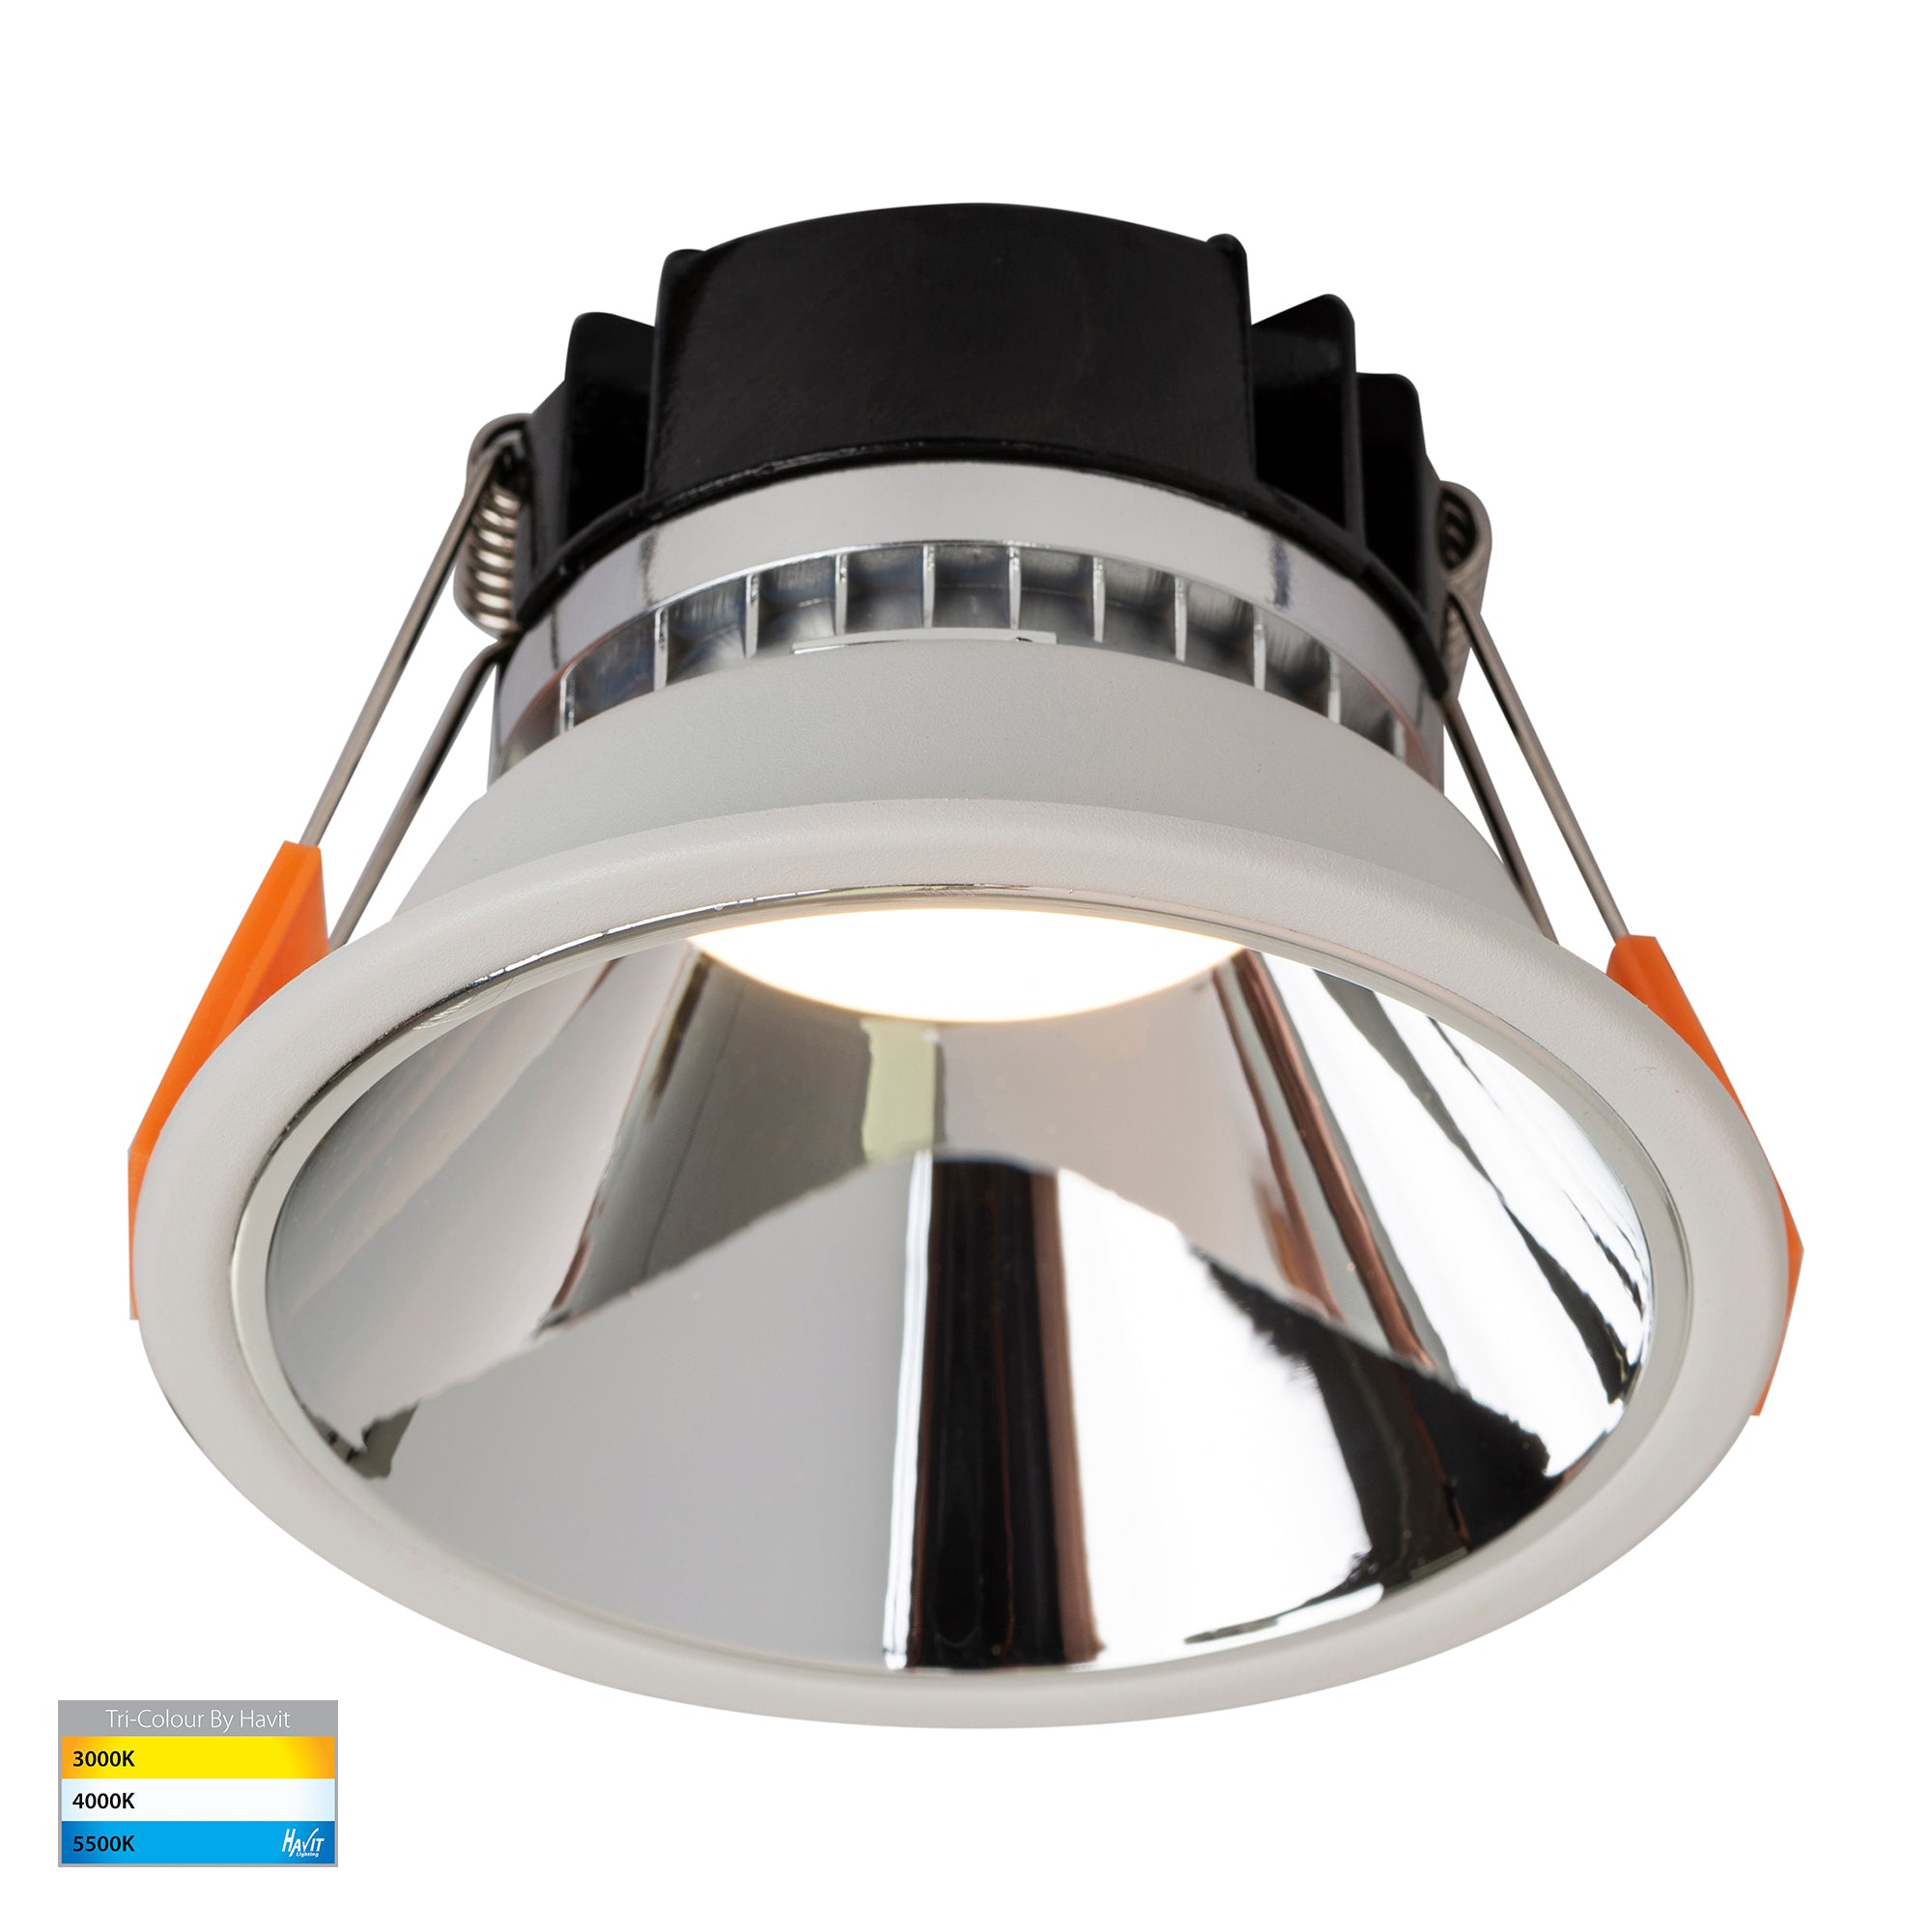 HV5528T-WC - Gleam White with Chrome Insert Tri Colour Fixed Deep LED Downlight